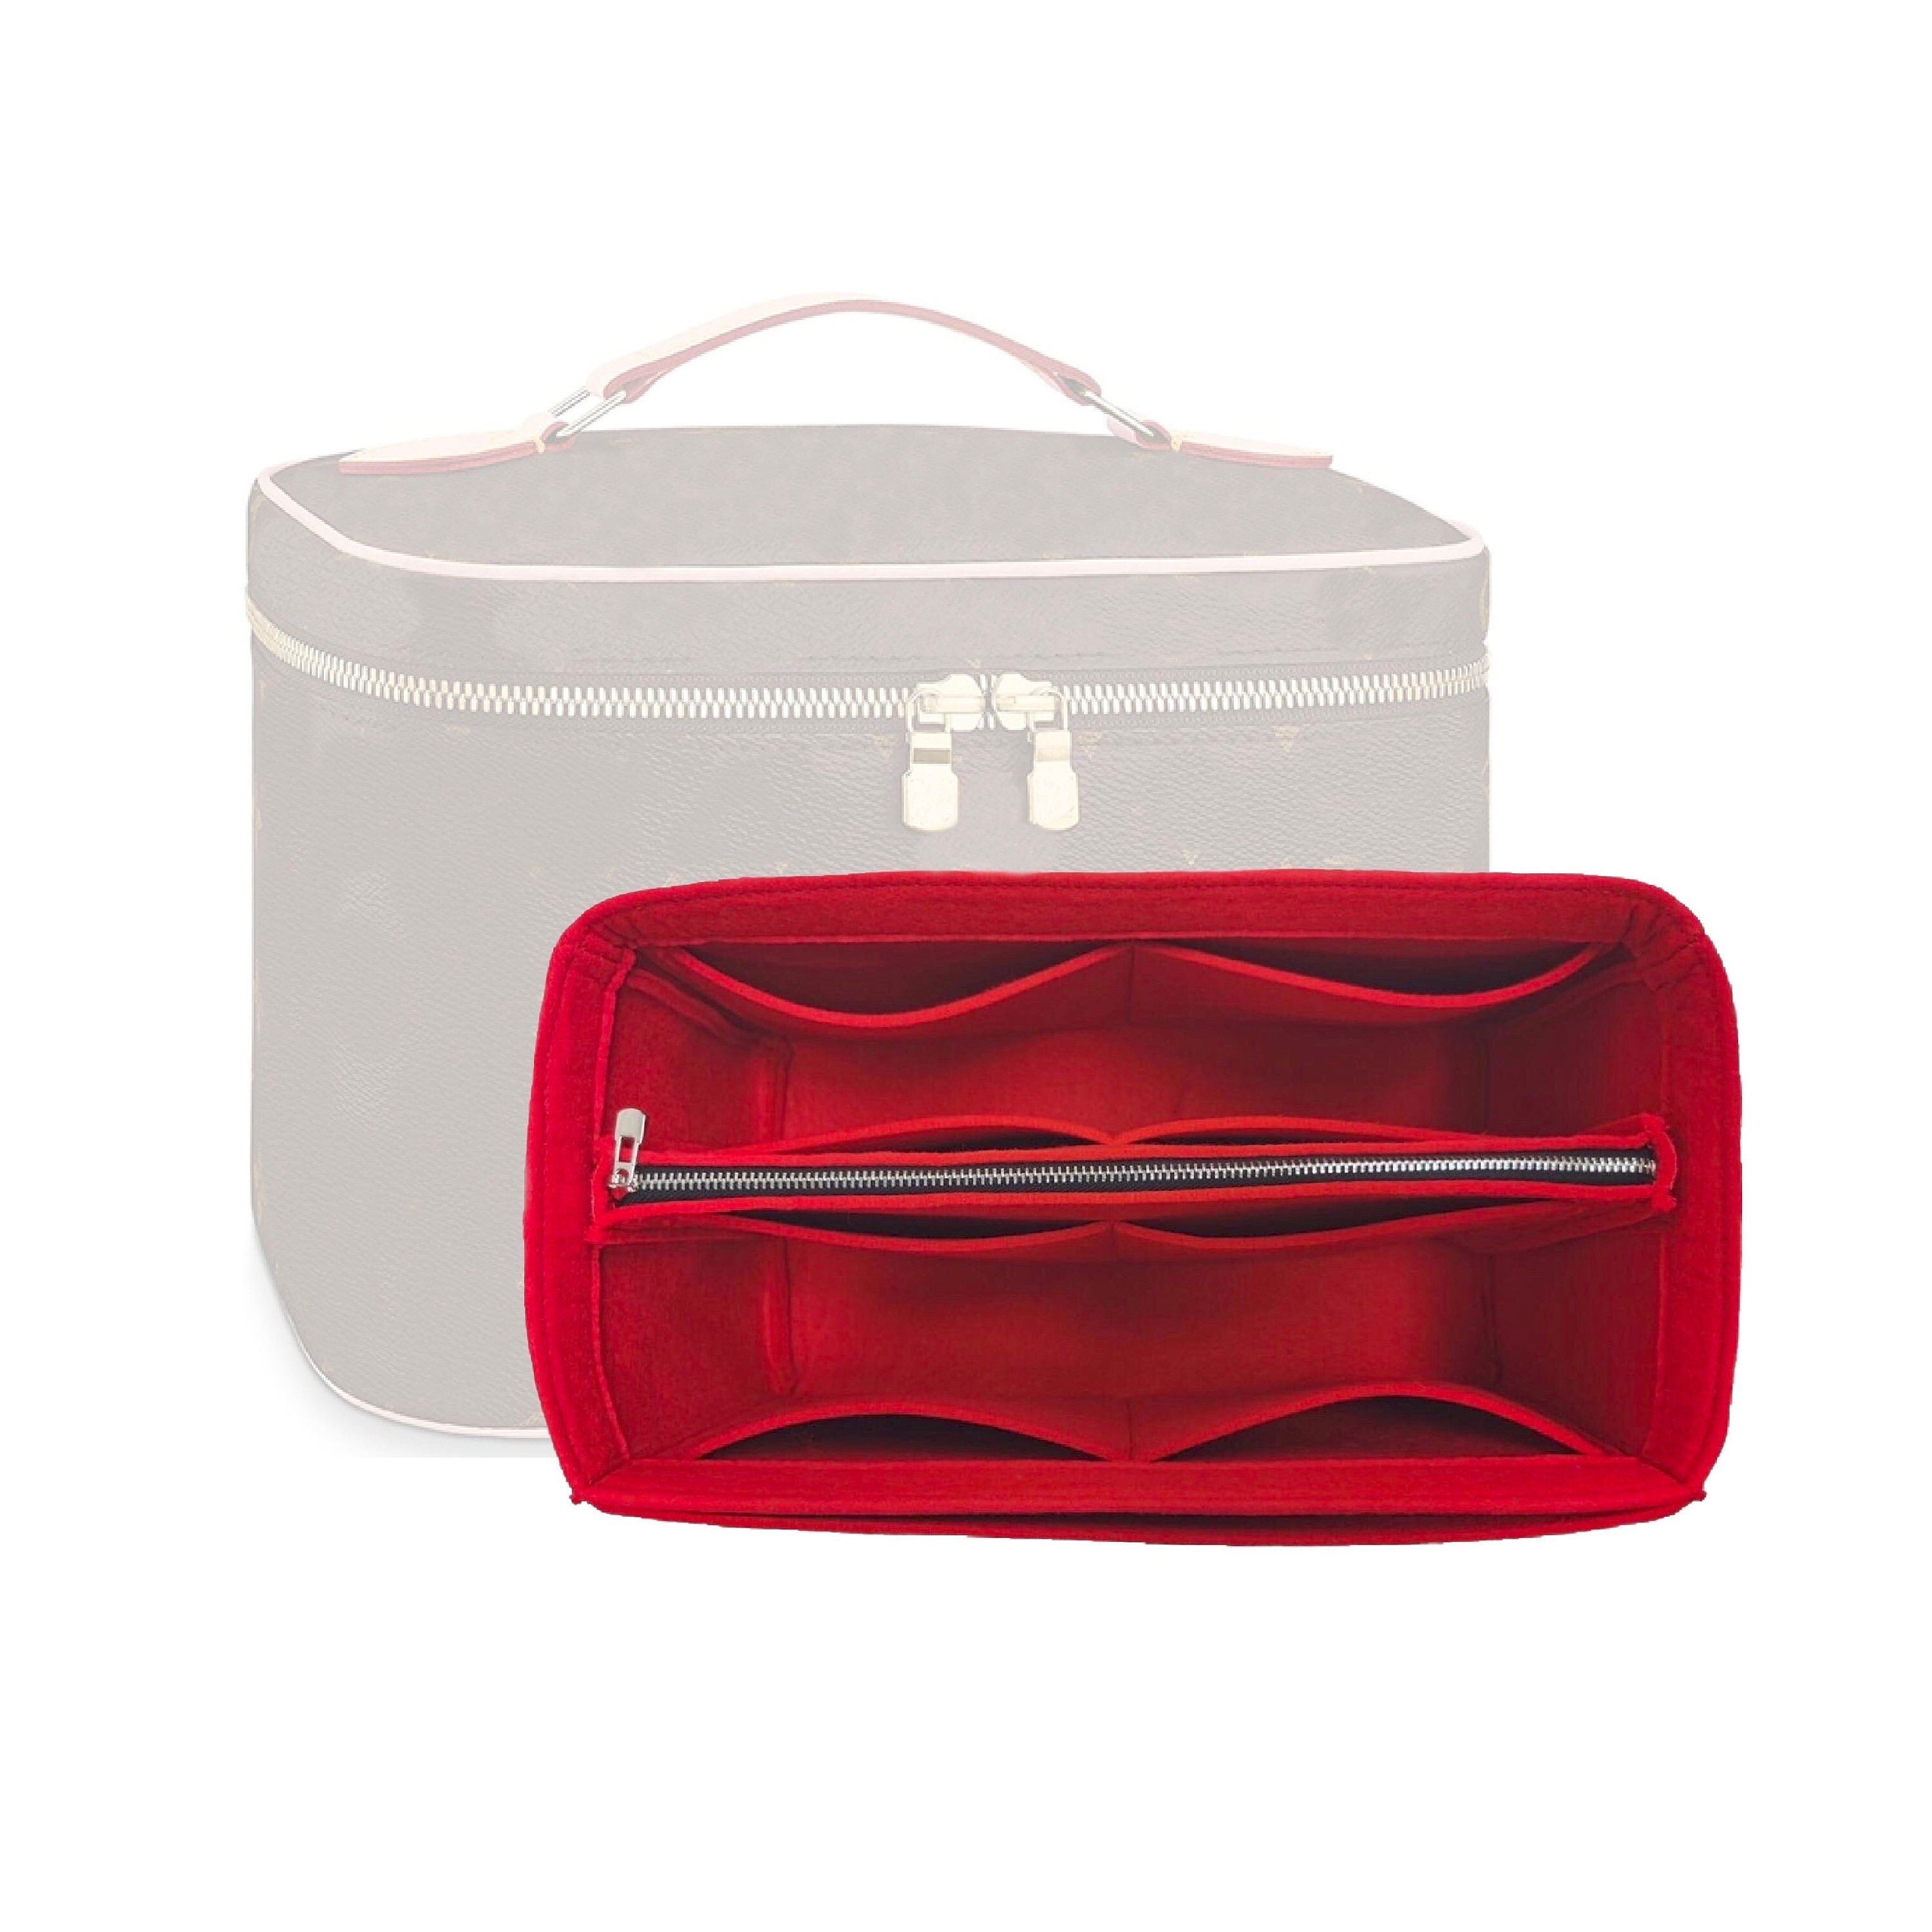 Naughtipidgins Nest - Louis Vuitton Nice BB Toiletry Bag Vanity Case in  Monogram with Samorga Felt Liner. See here for price, details and to  purchase >   Nice-BB-Toiletry-Bag